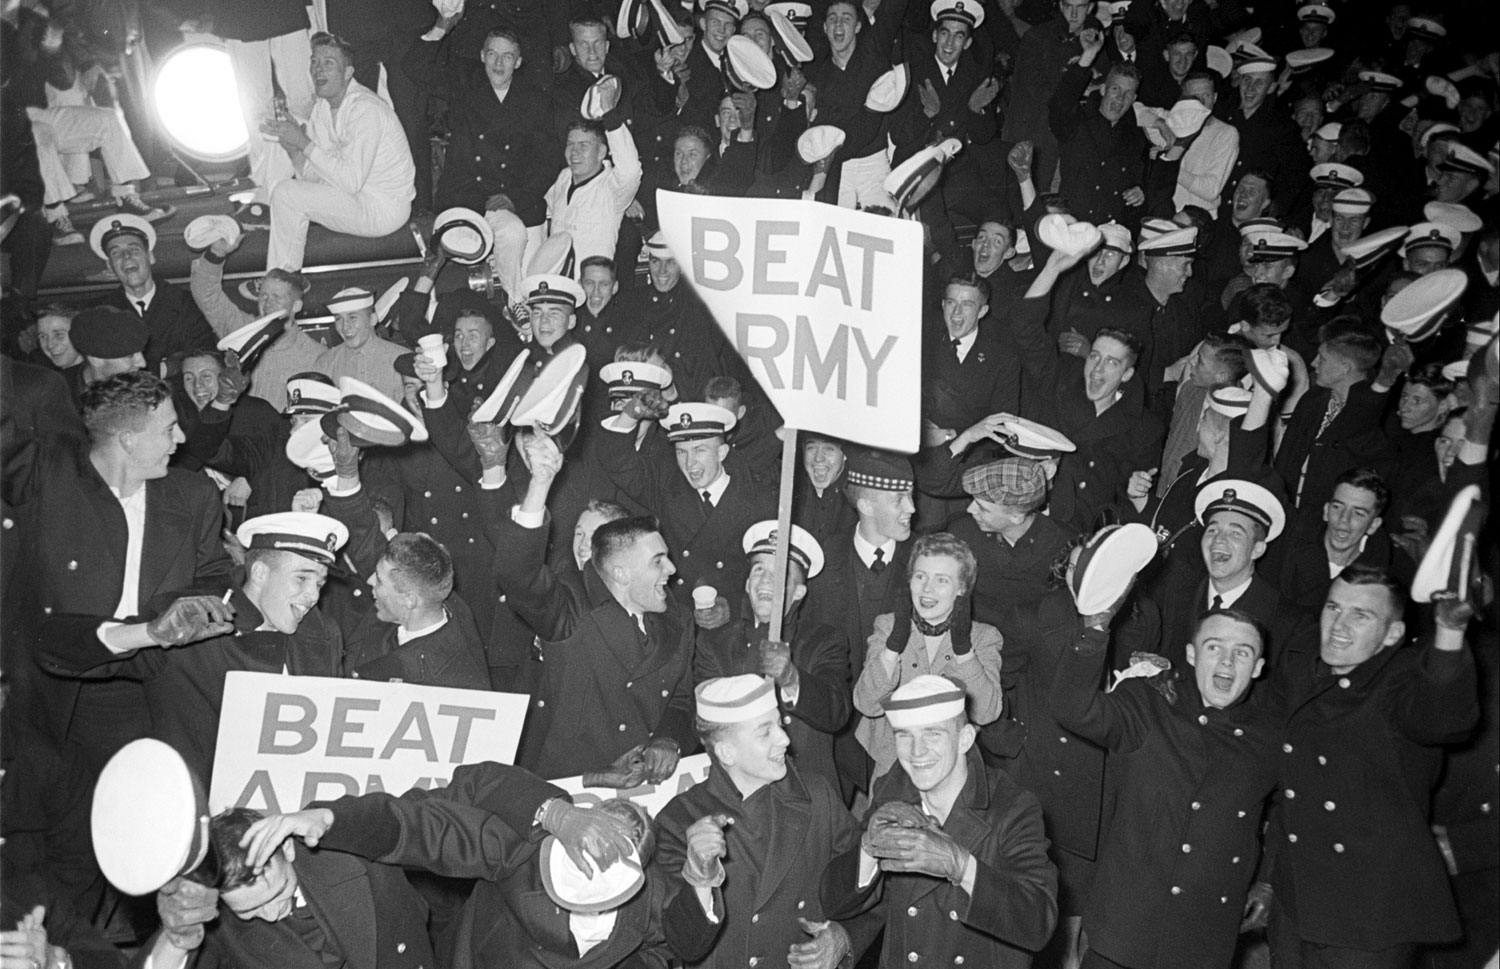 Army-Navy game, 1953.